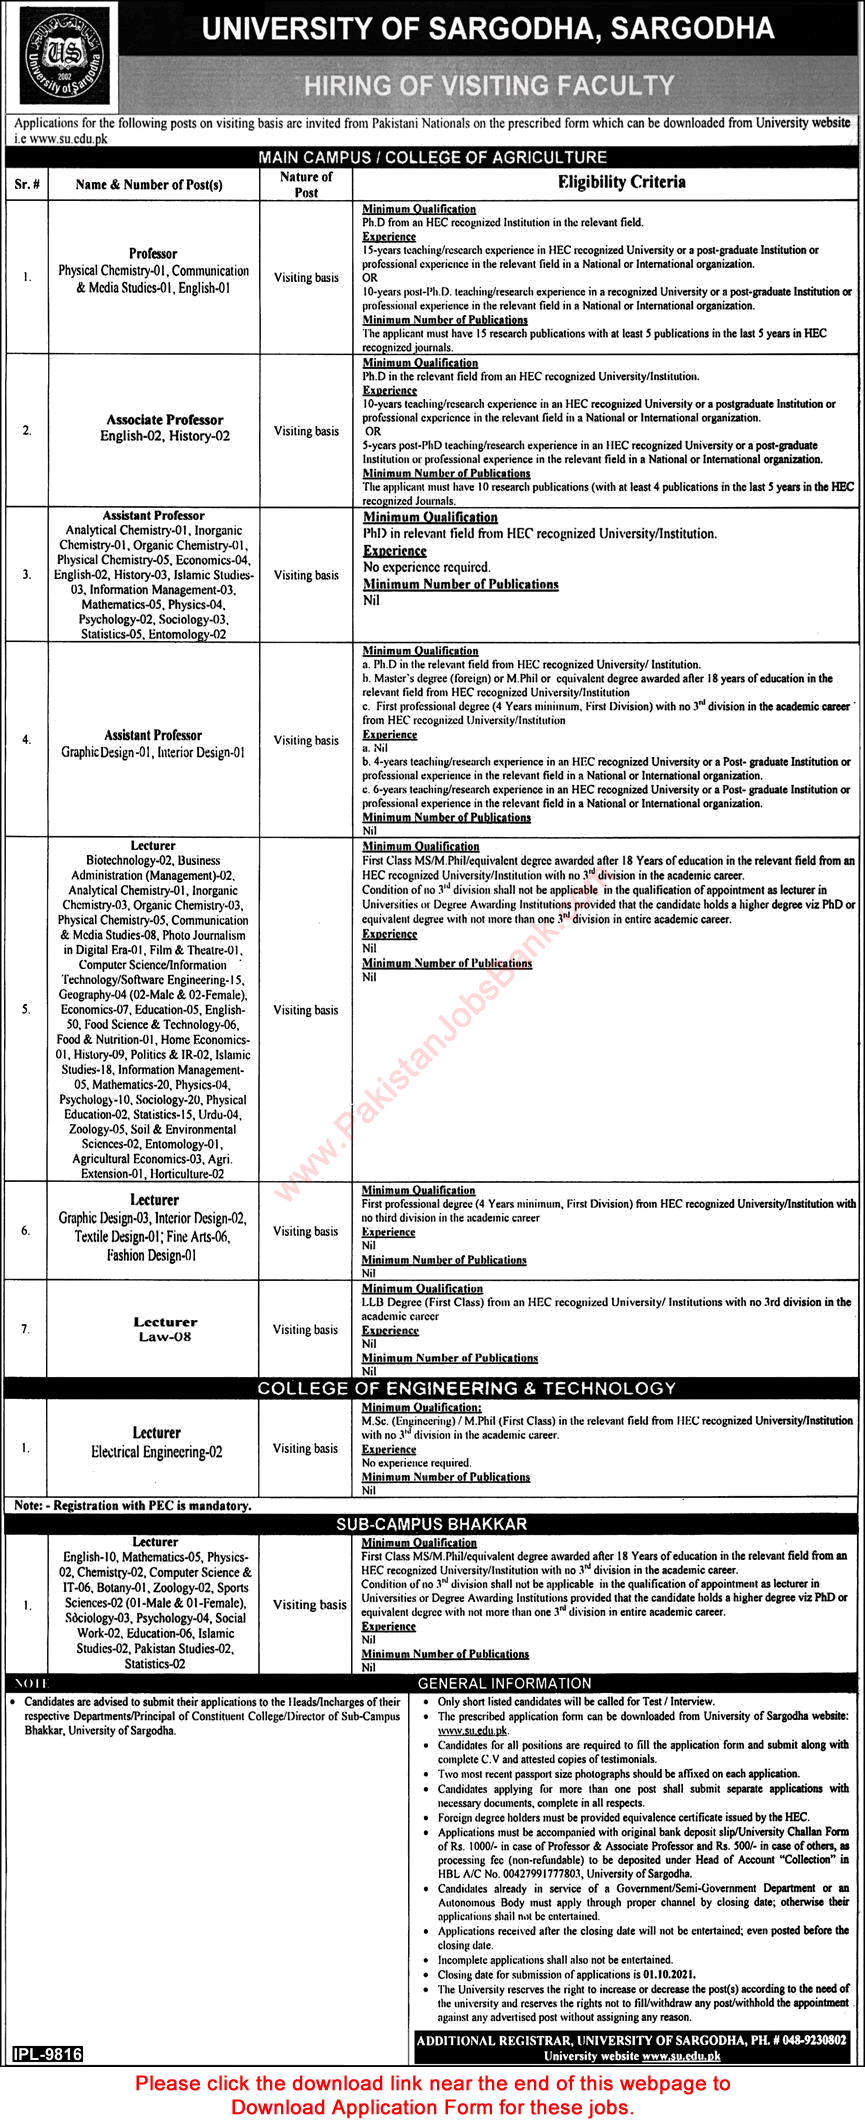 Teaching Faculty Jobs in University of Sargodha 2021 September UOS Application Form Latest